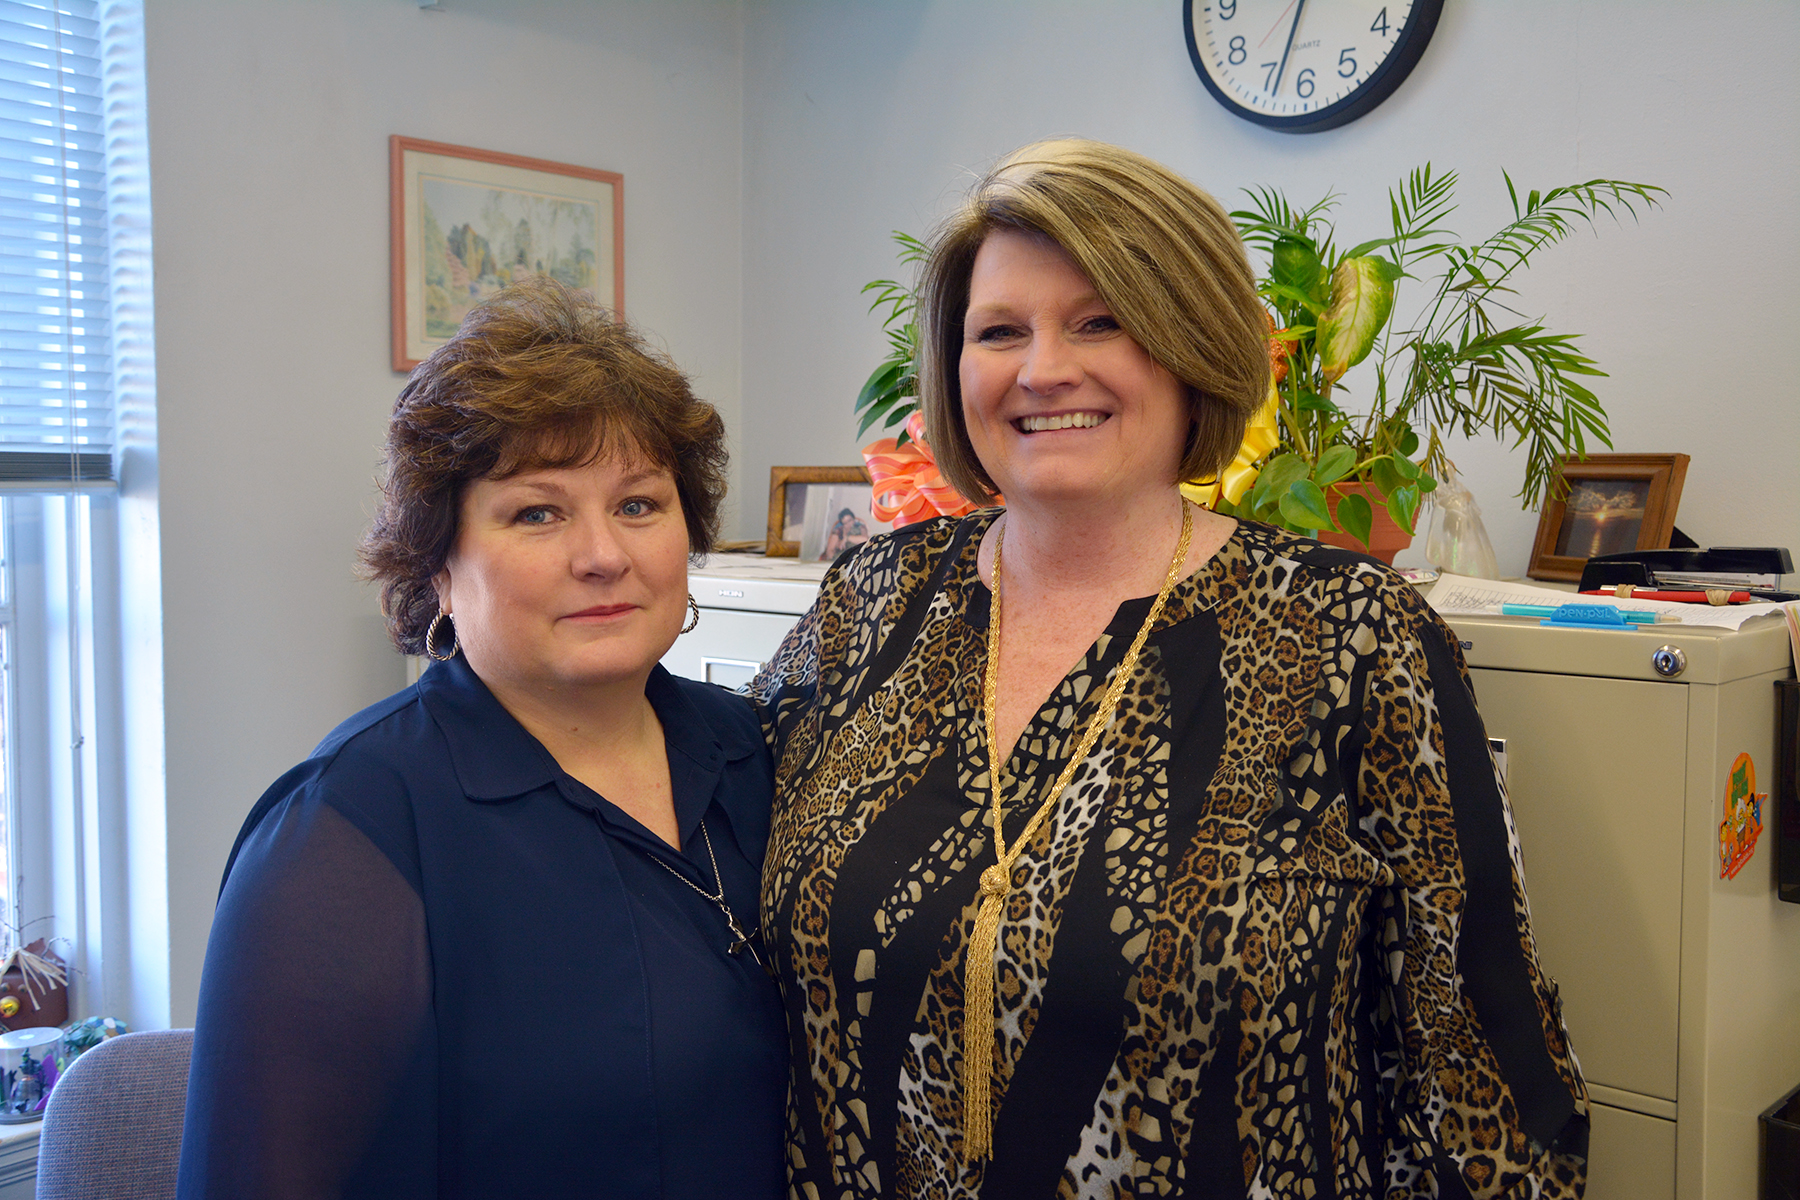 Pictured are Sheila Trotter, left, and Donna Whitley, who both earned a Public Administration Certificate from Richmond Community College to gain additional training for their jobs with Richmond County government.